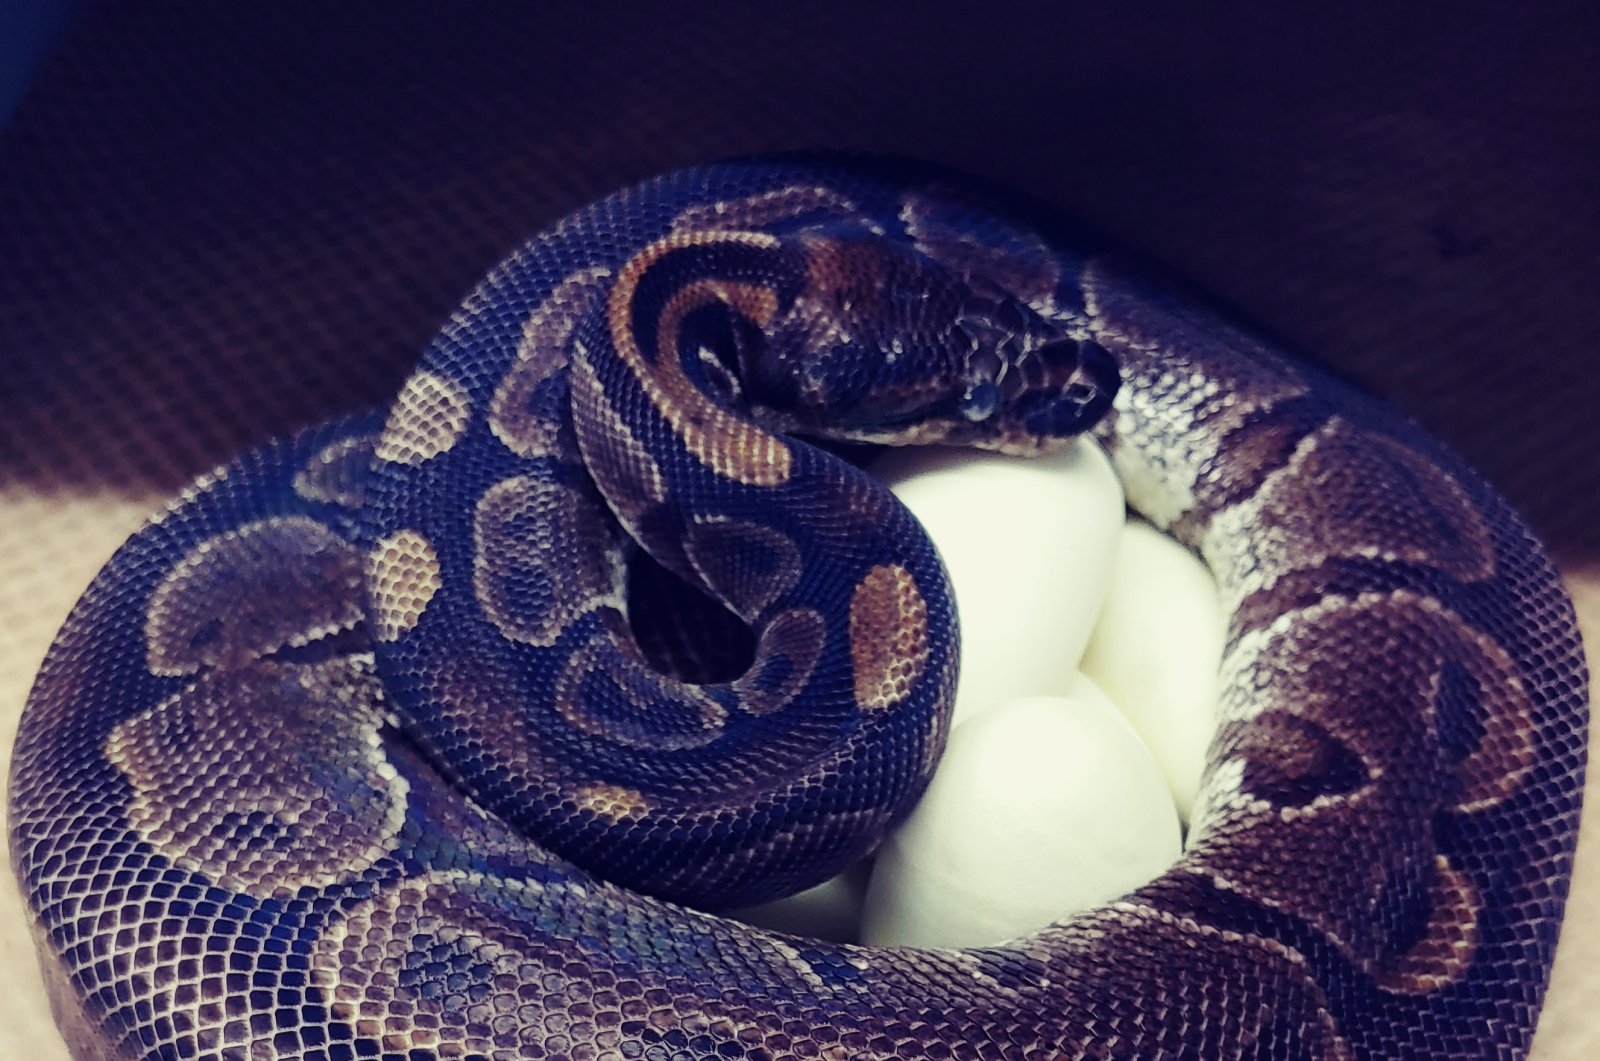 This photo provided by the Saint Louis Zoo shows,a 62-year-old ball python curled up around her eggs July 23, 2020. (AP Photo)